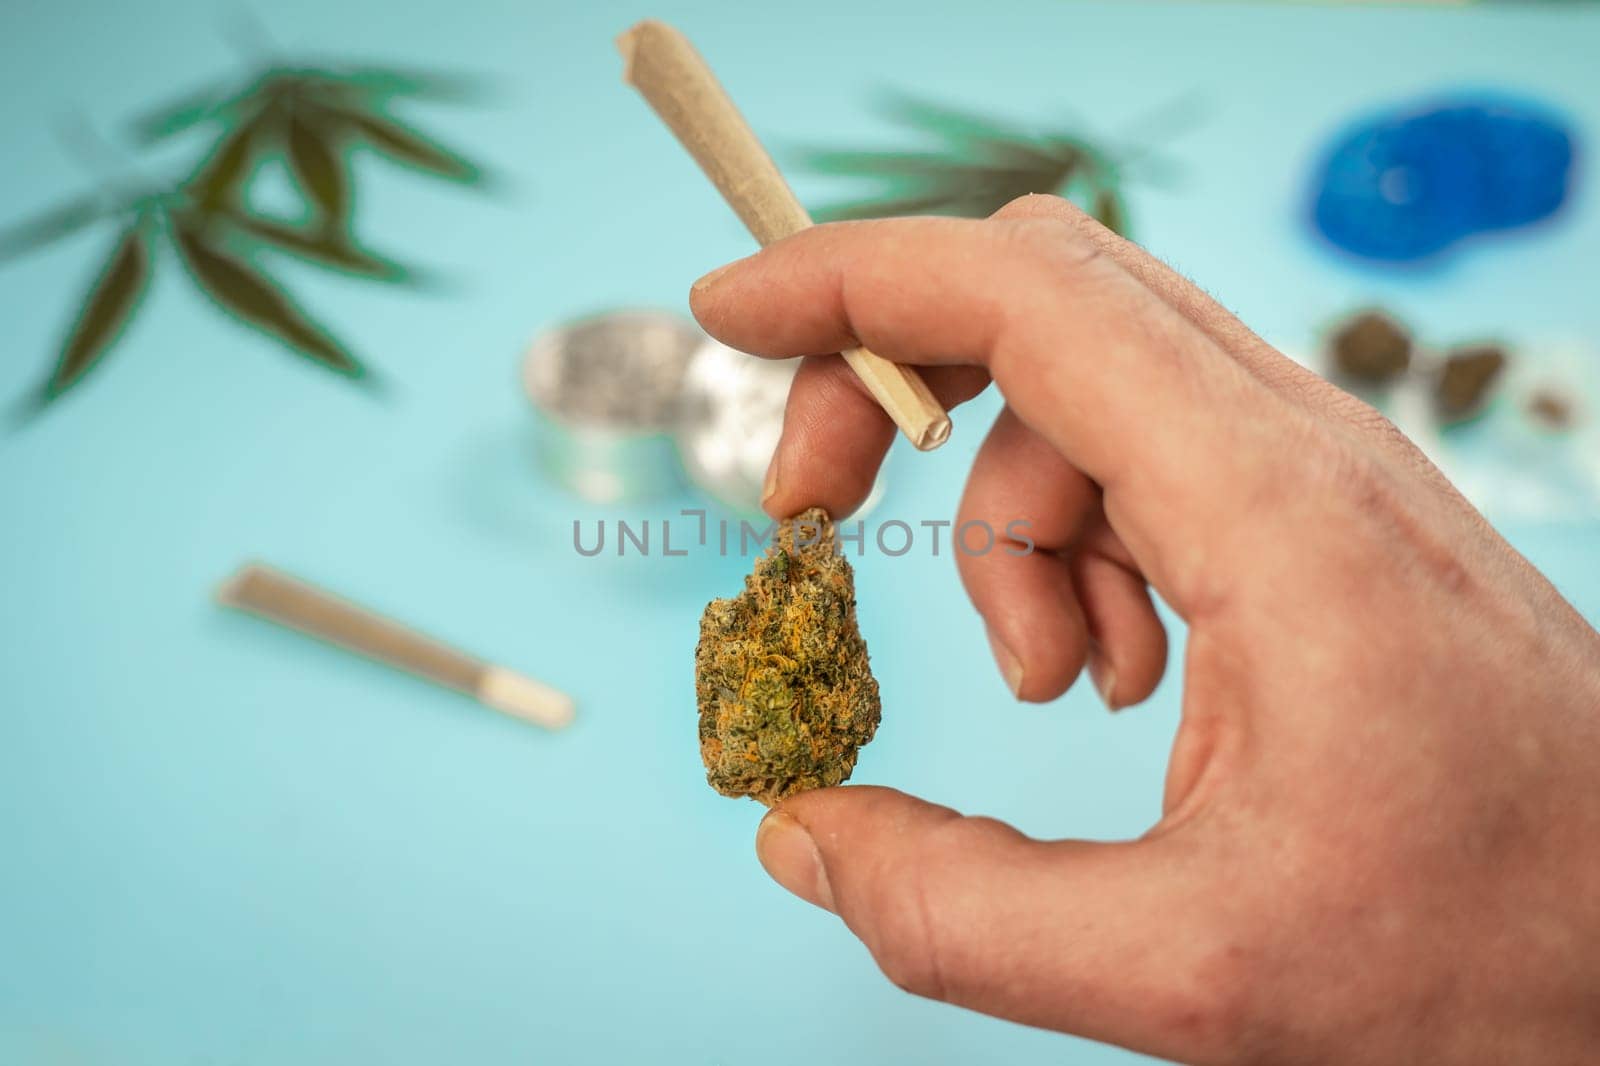 Hand with CBD medical marijuana and hemp leaves on turquoise background. by PaulCarr